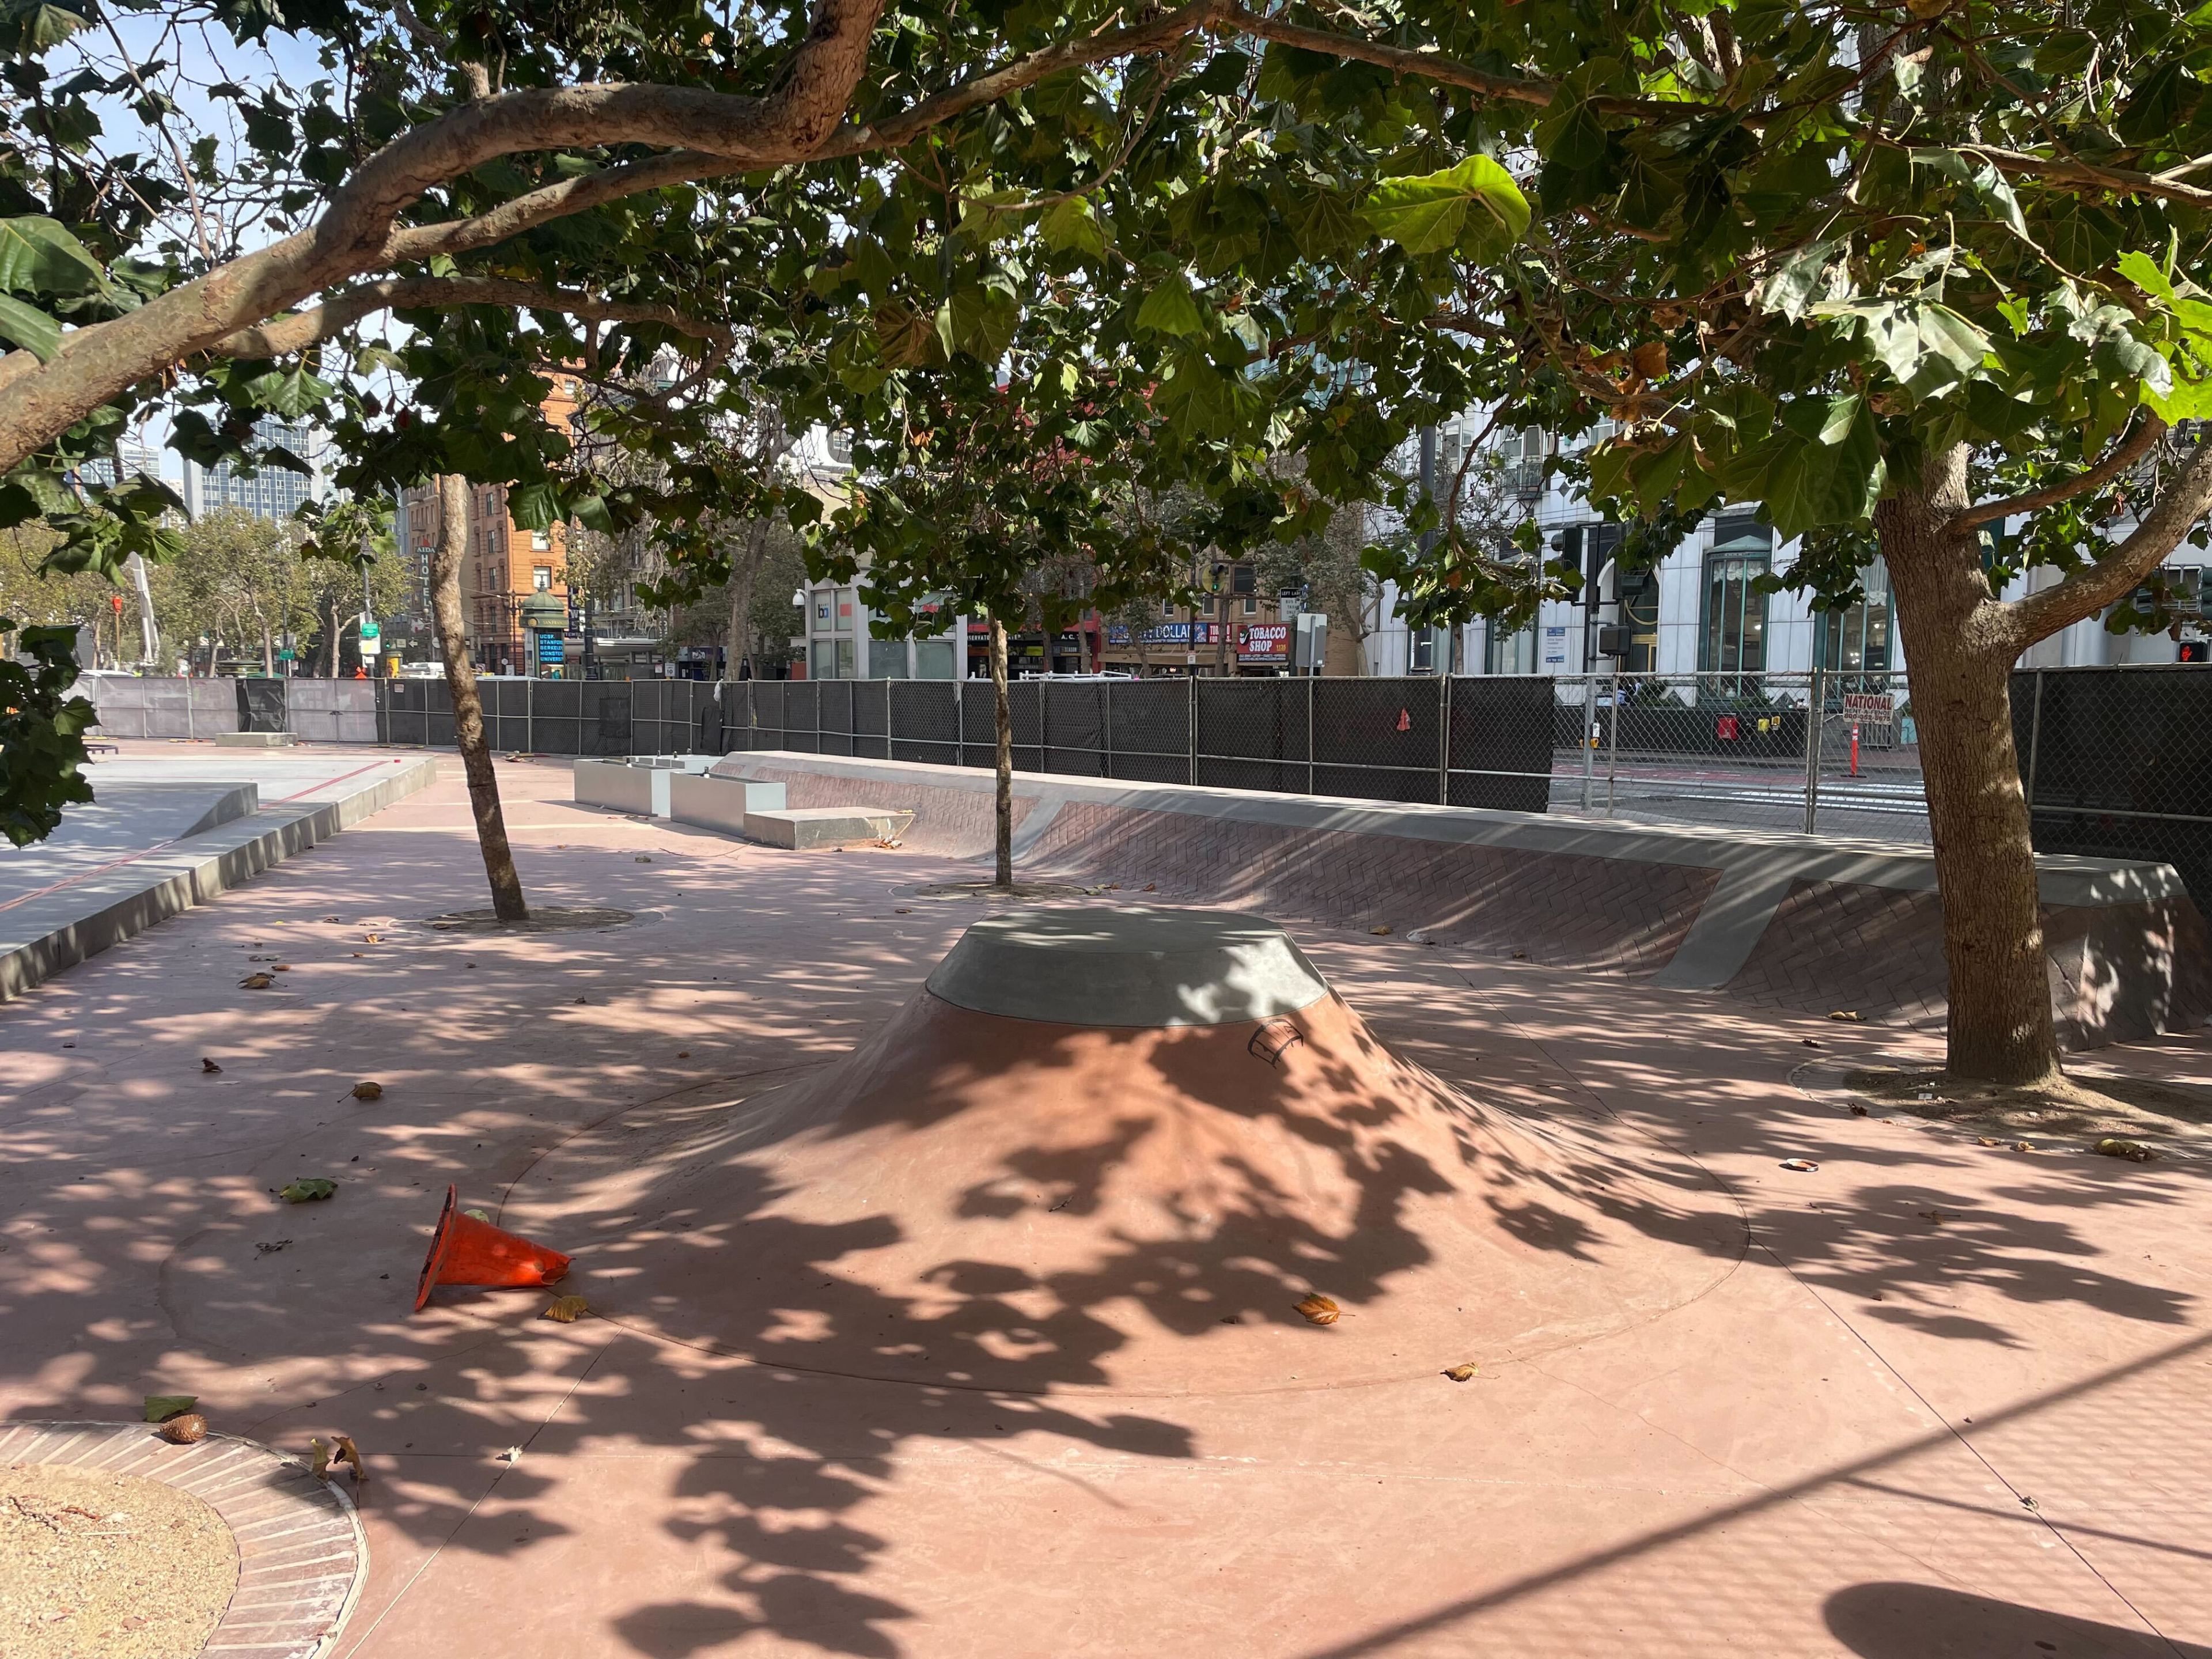 A view of modifications to the brick at U.N. Plaza, creating ramps to attract skateboarders.